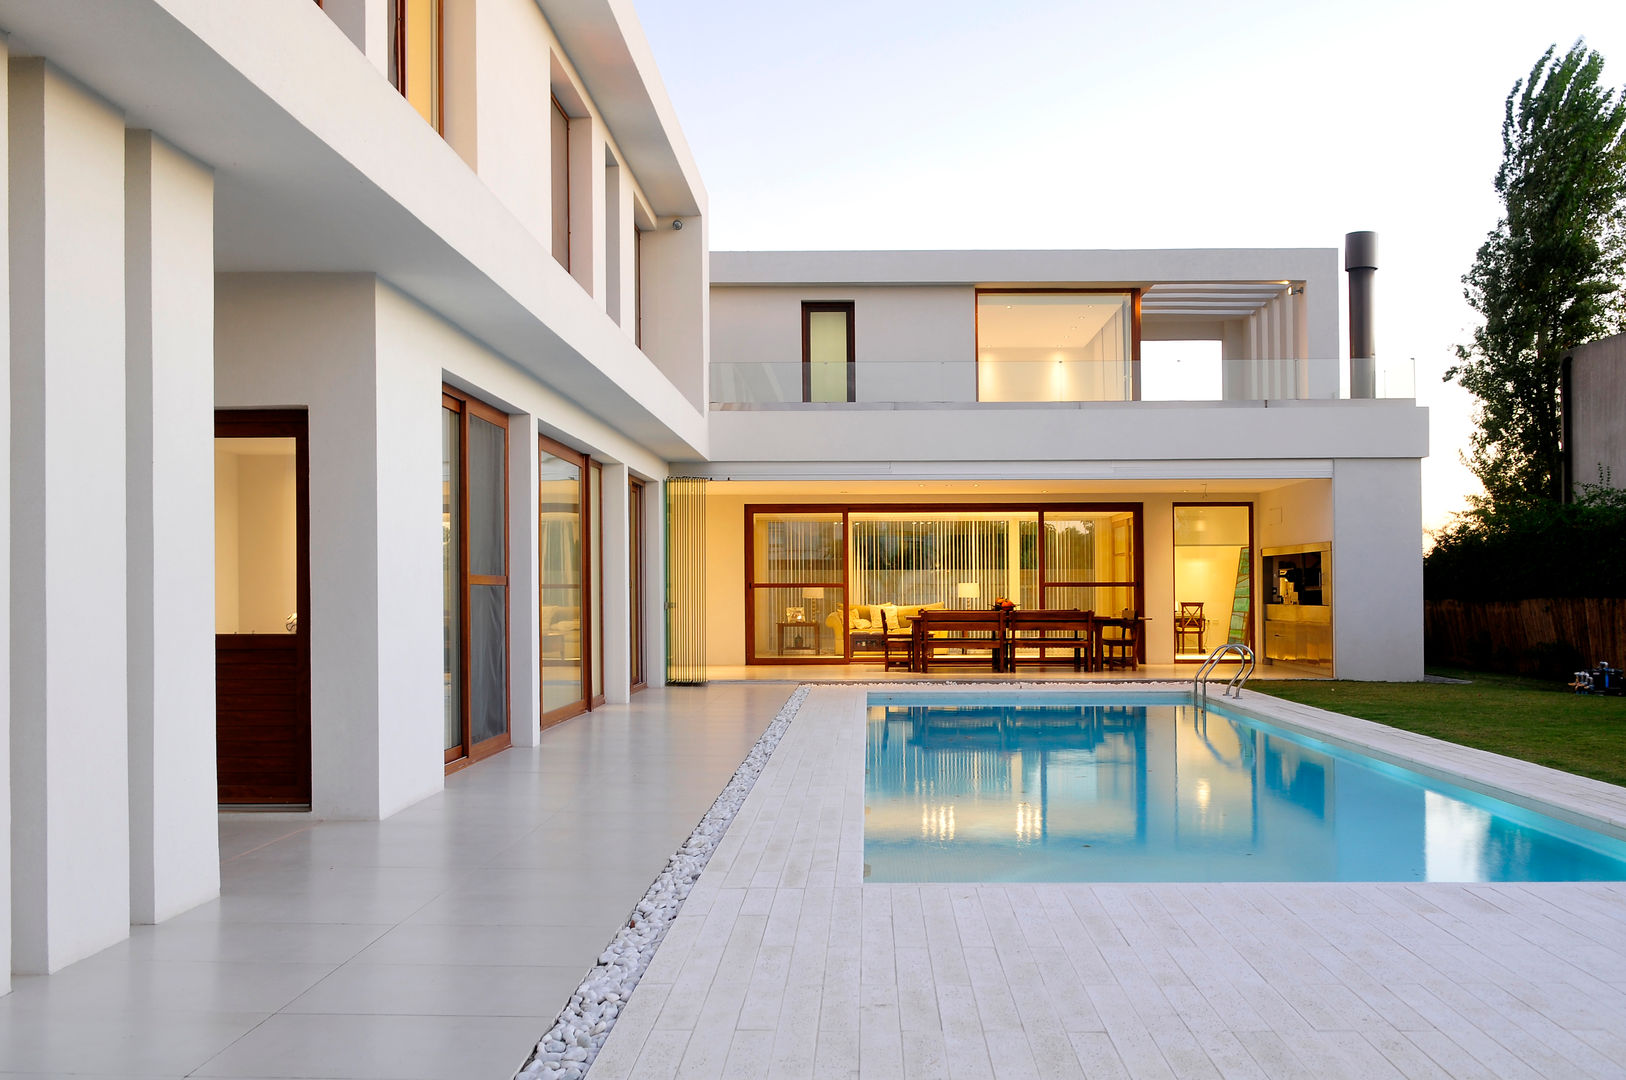 The pool is the center of the house Ramirez Arquitectura Piscinas Cerámico